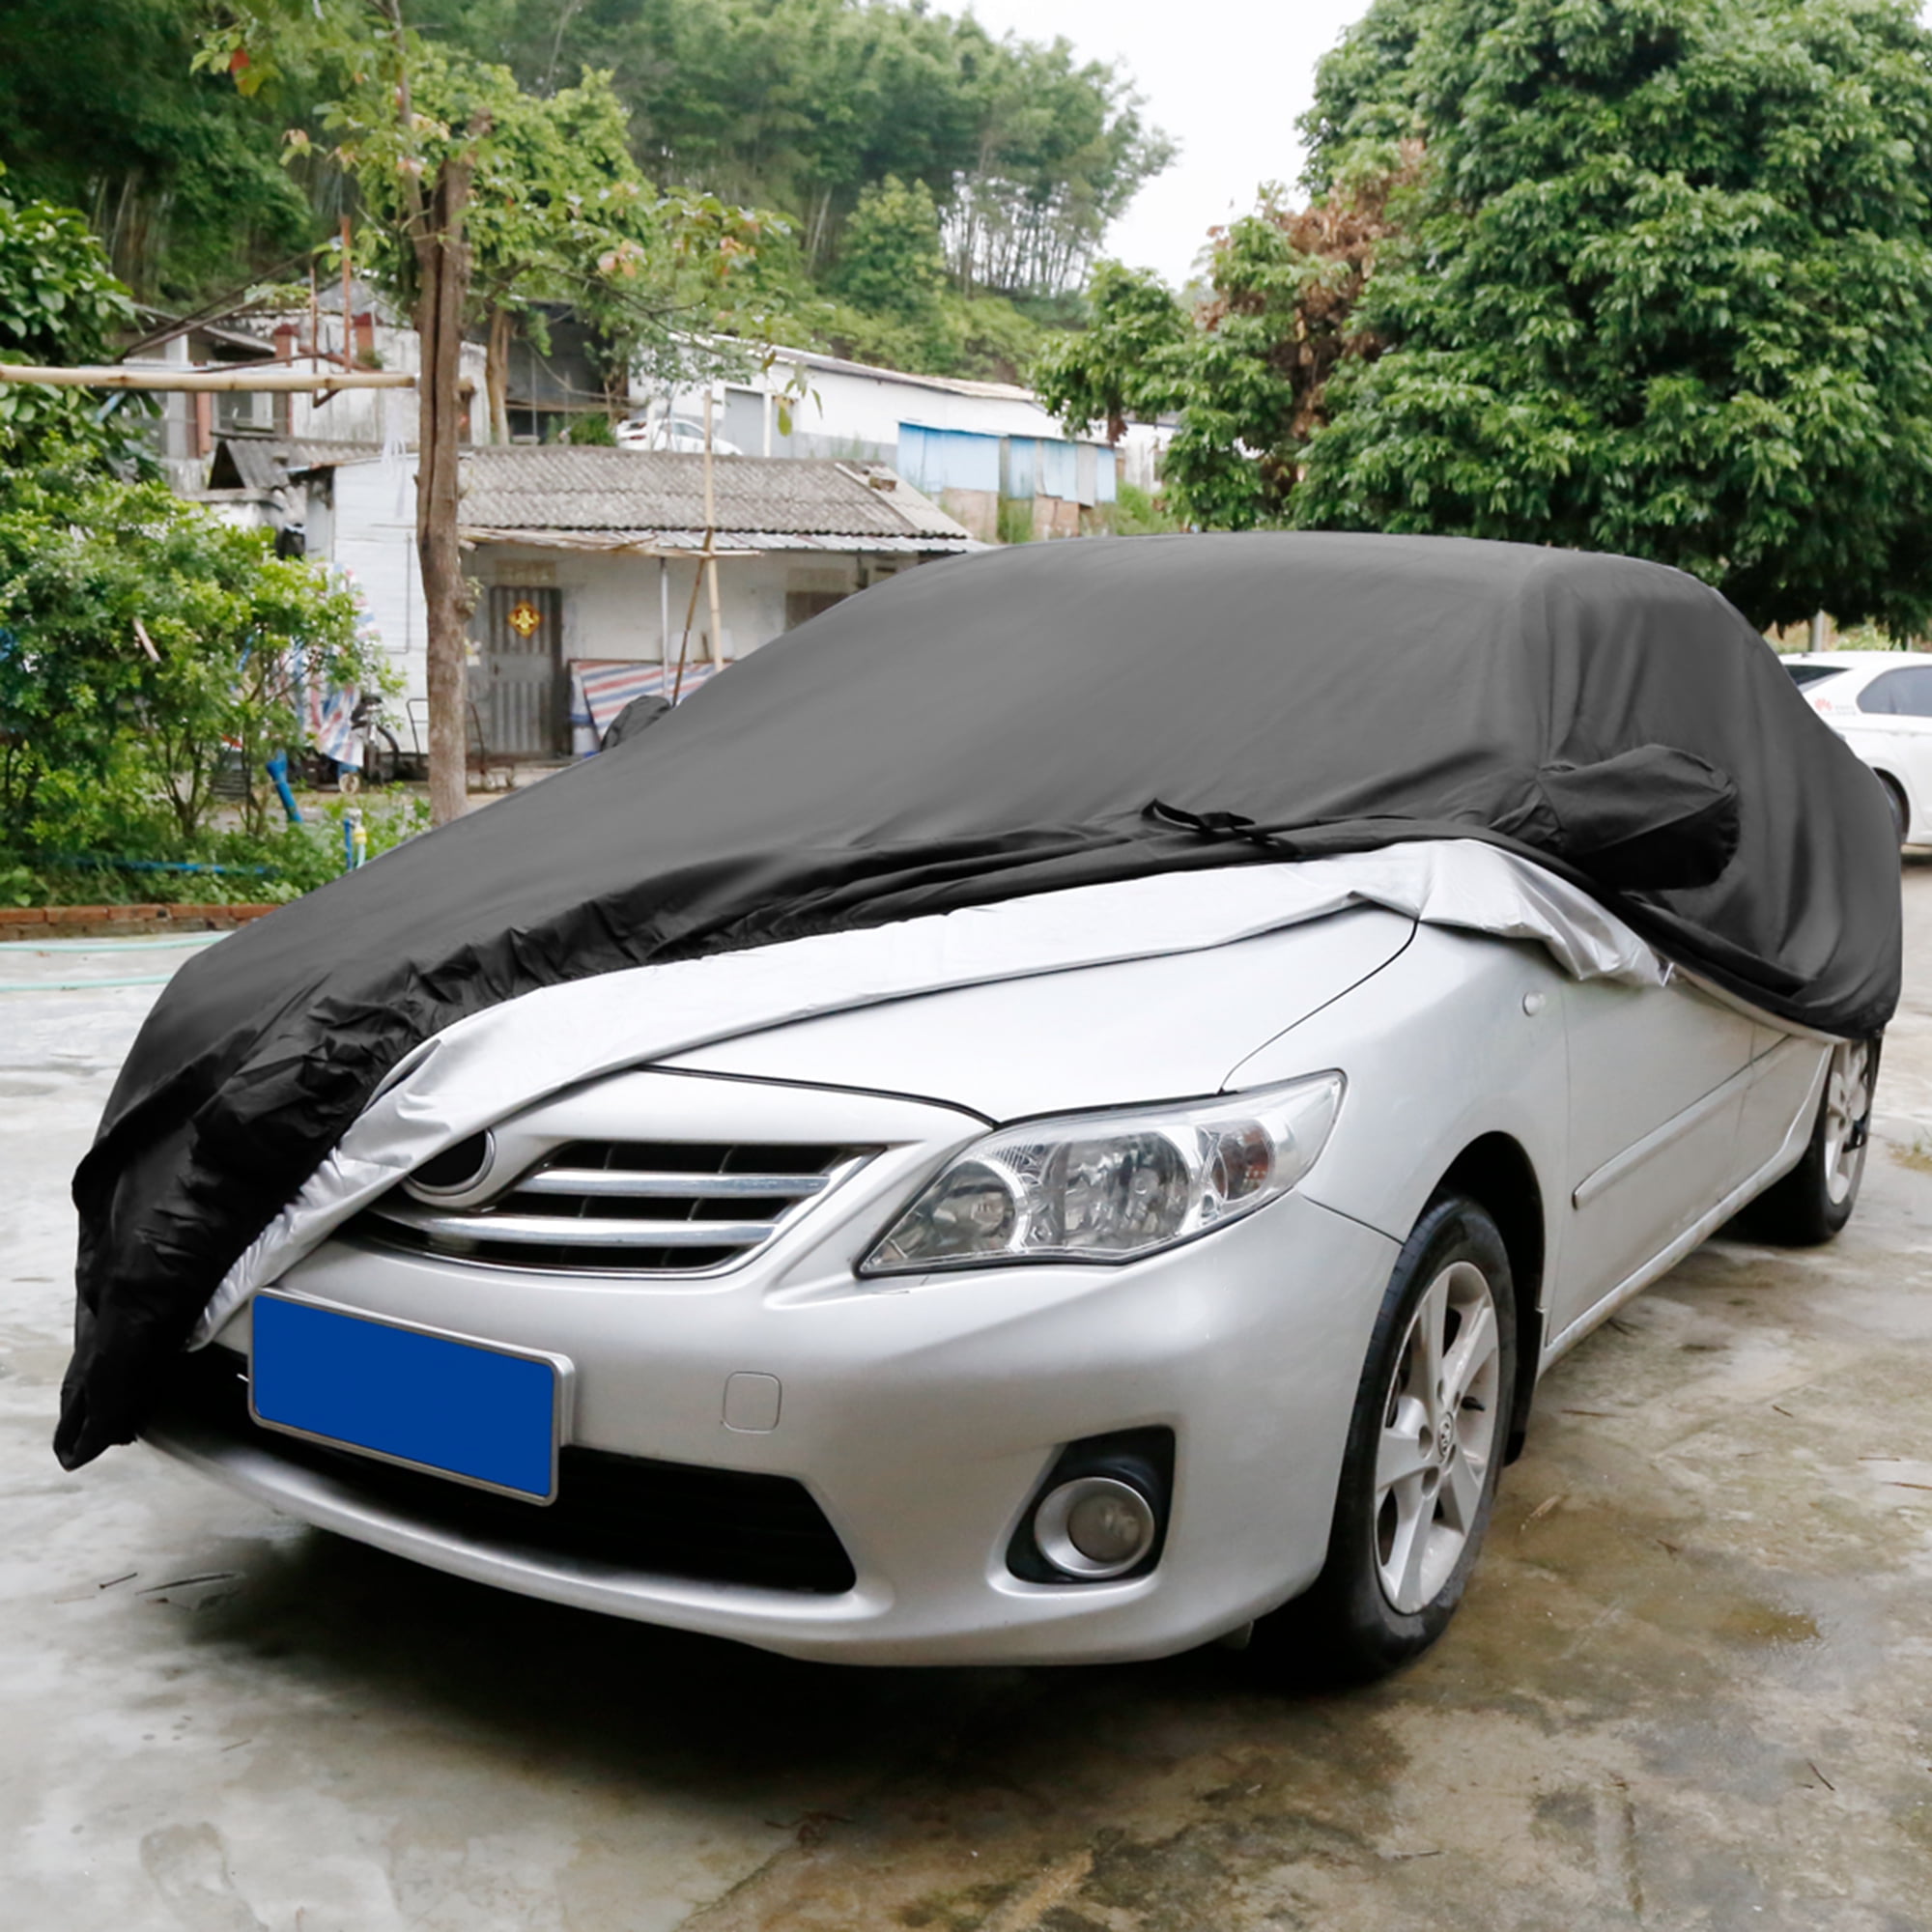 Waterproof UV Resistant Breathable Car Cover for Nissan Note, Almera, Juke